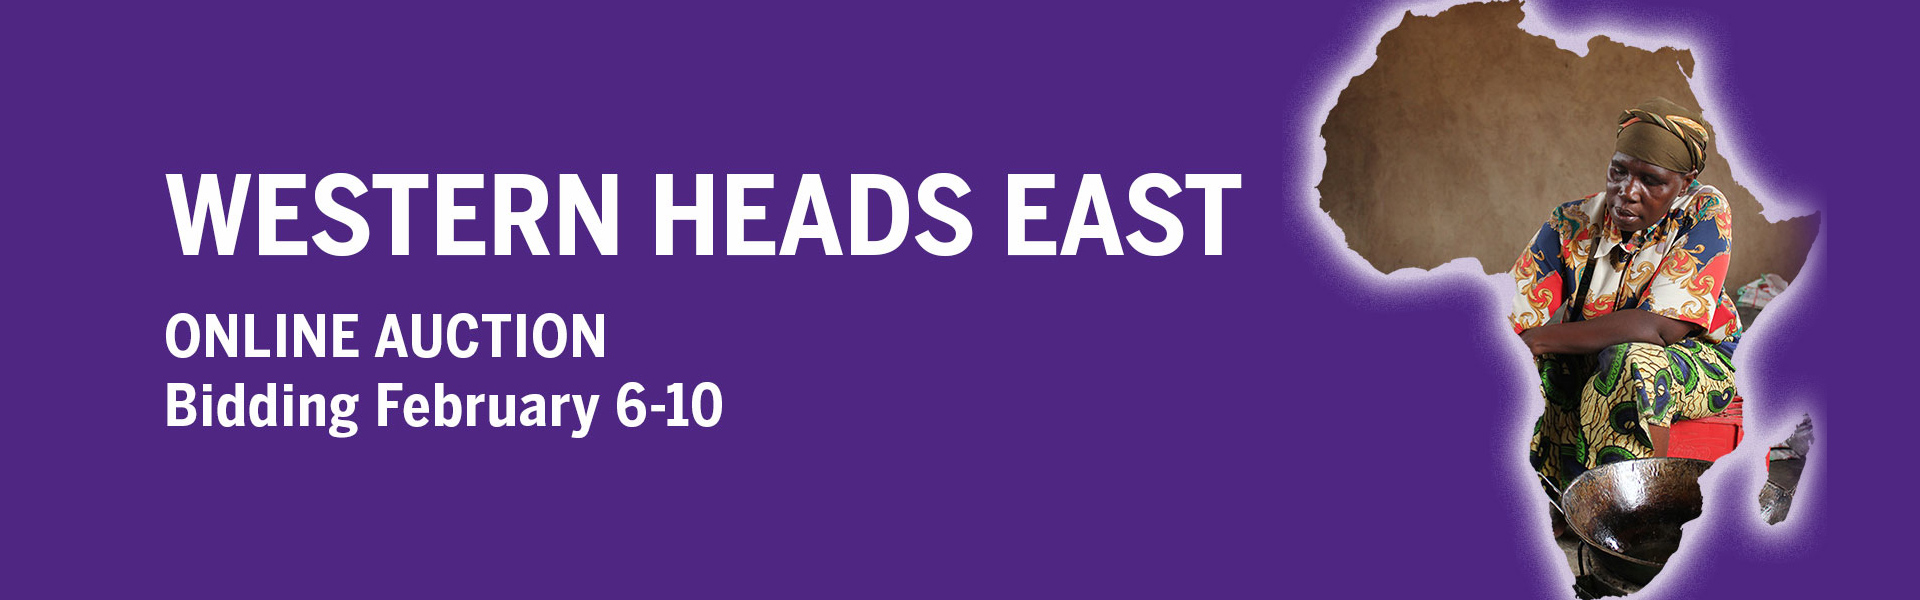 Western Heads East Online Auction